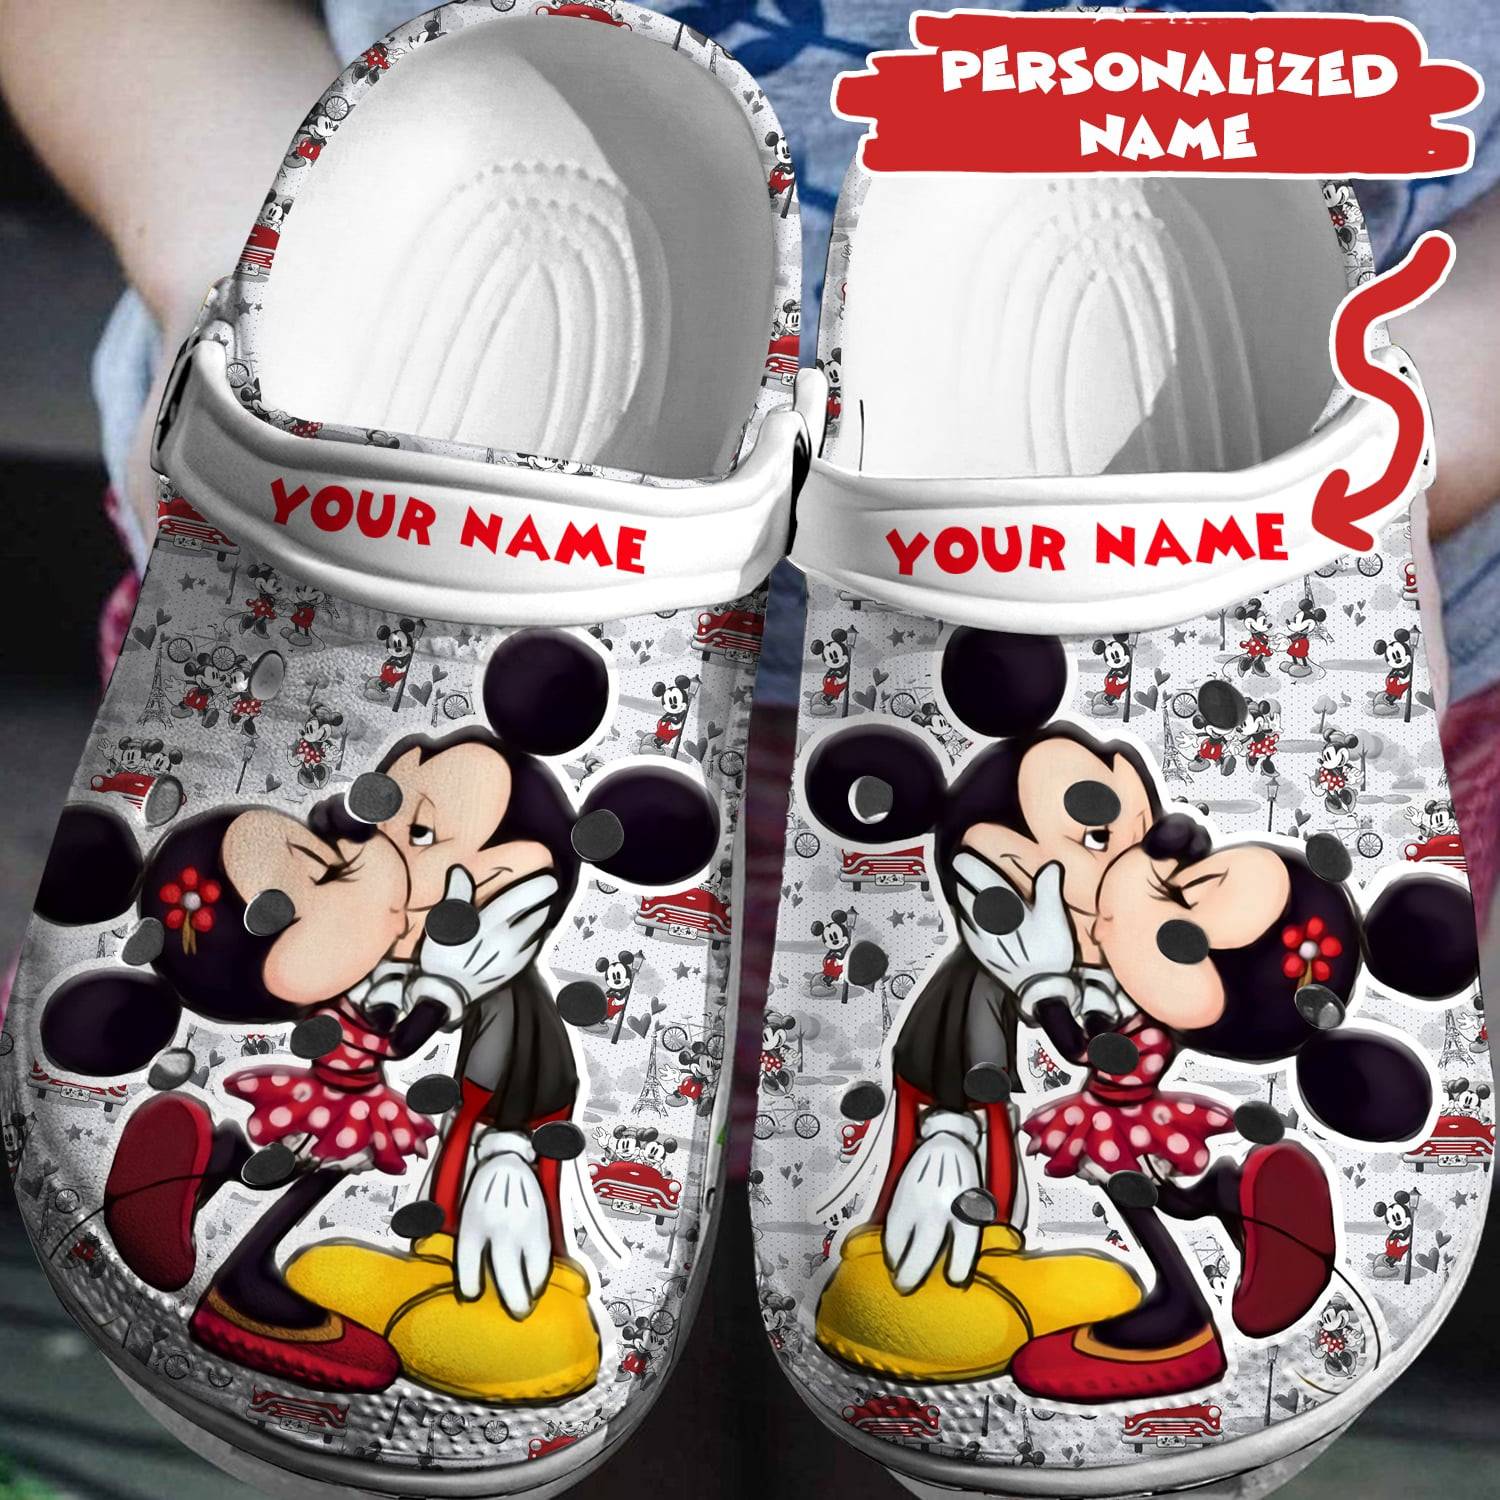 Design Your Disney Style: Personalized Mickey Minnie Crocs 3D Clog Shoes